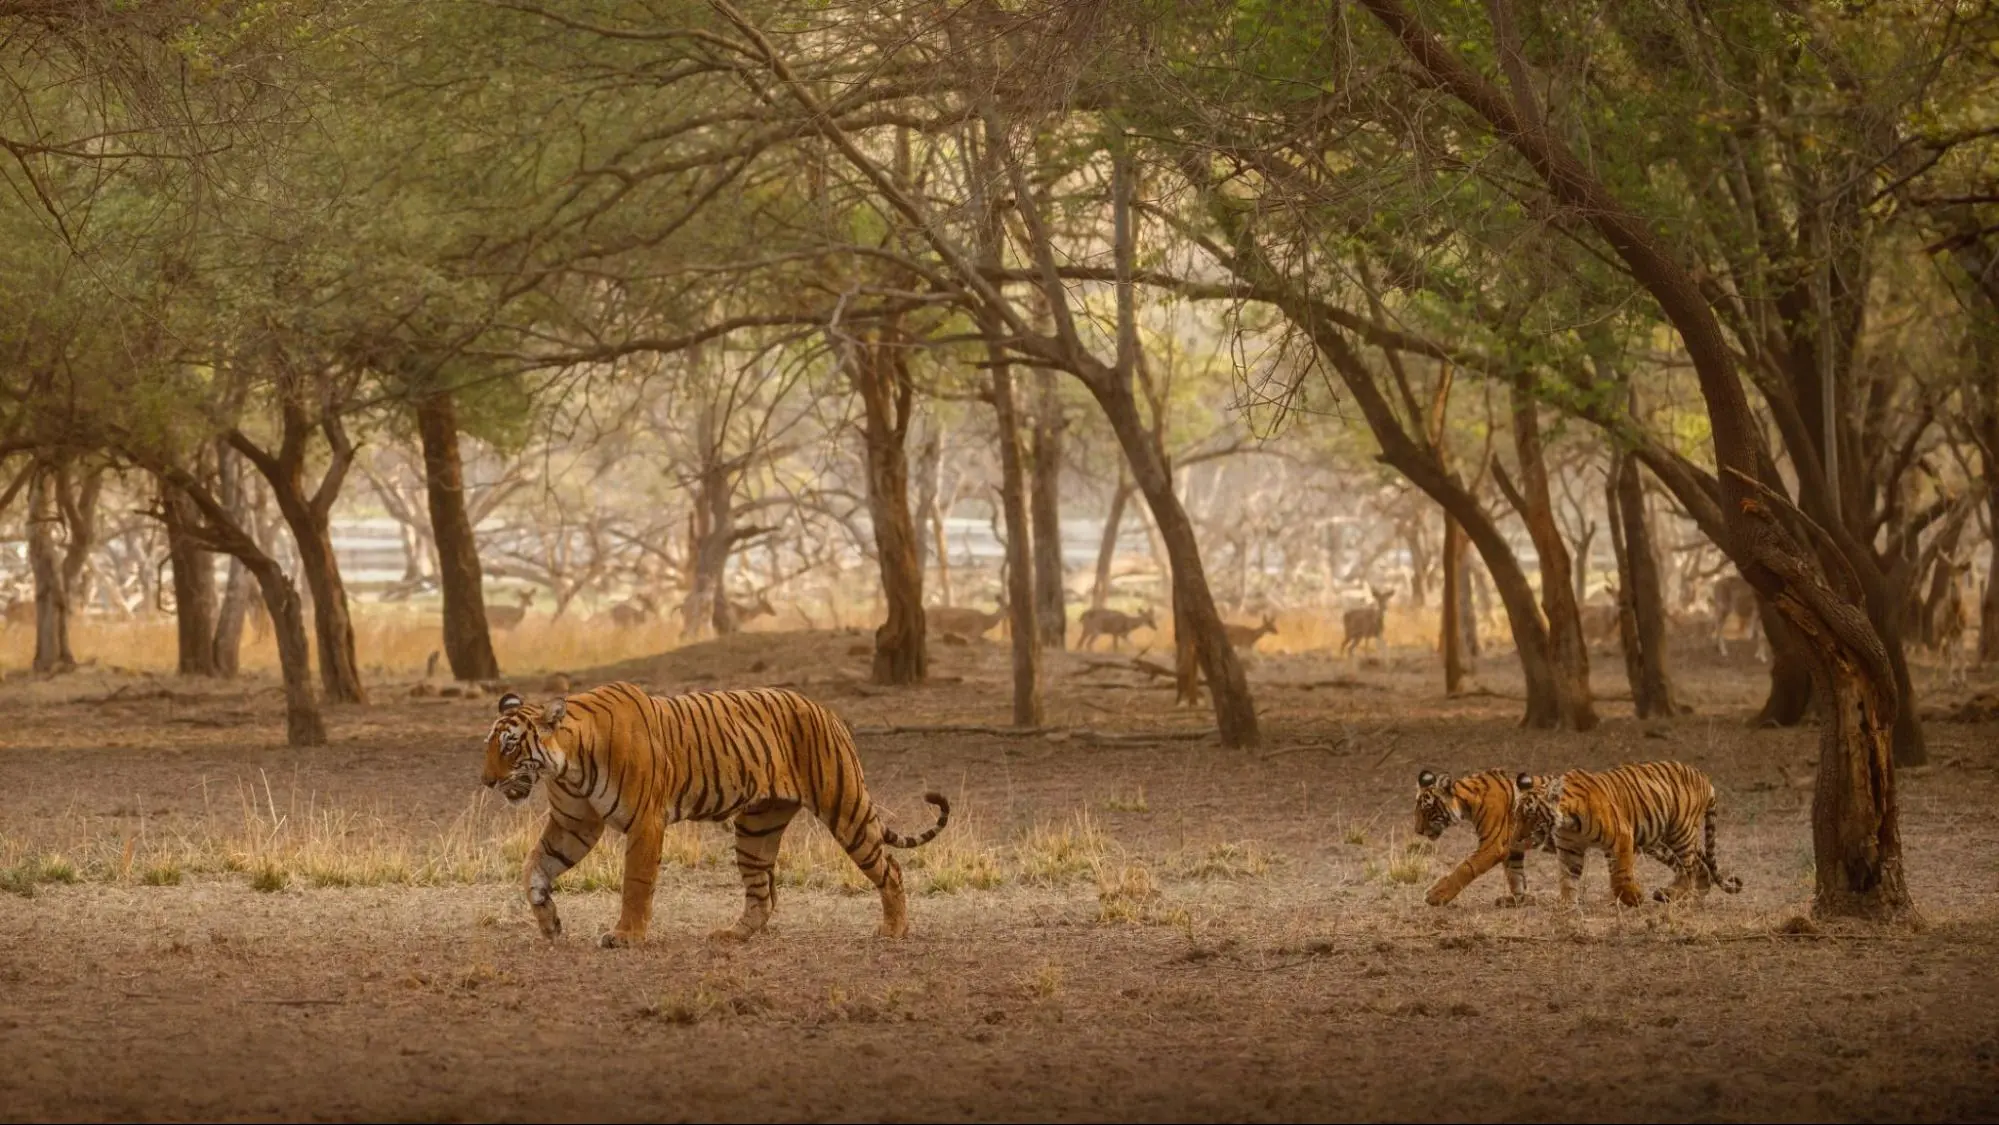 Tigers gracefully stroll through a lush forest, surrounded by towering trees in Serengeti